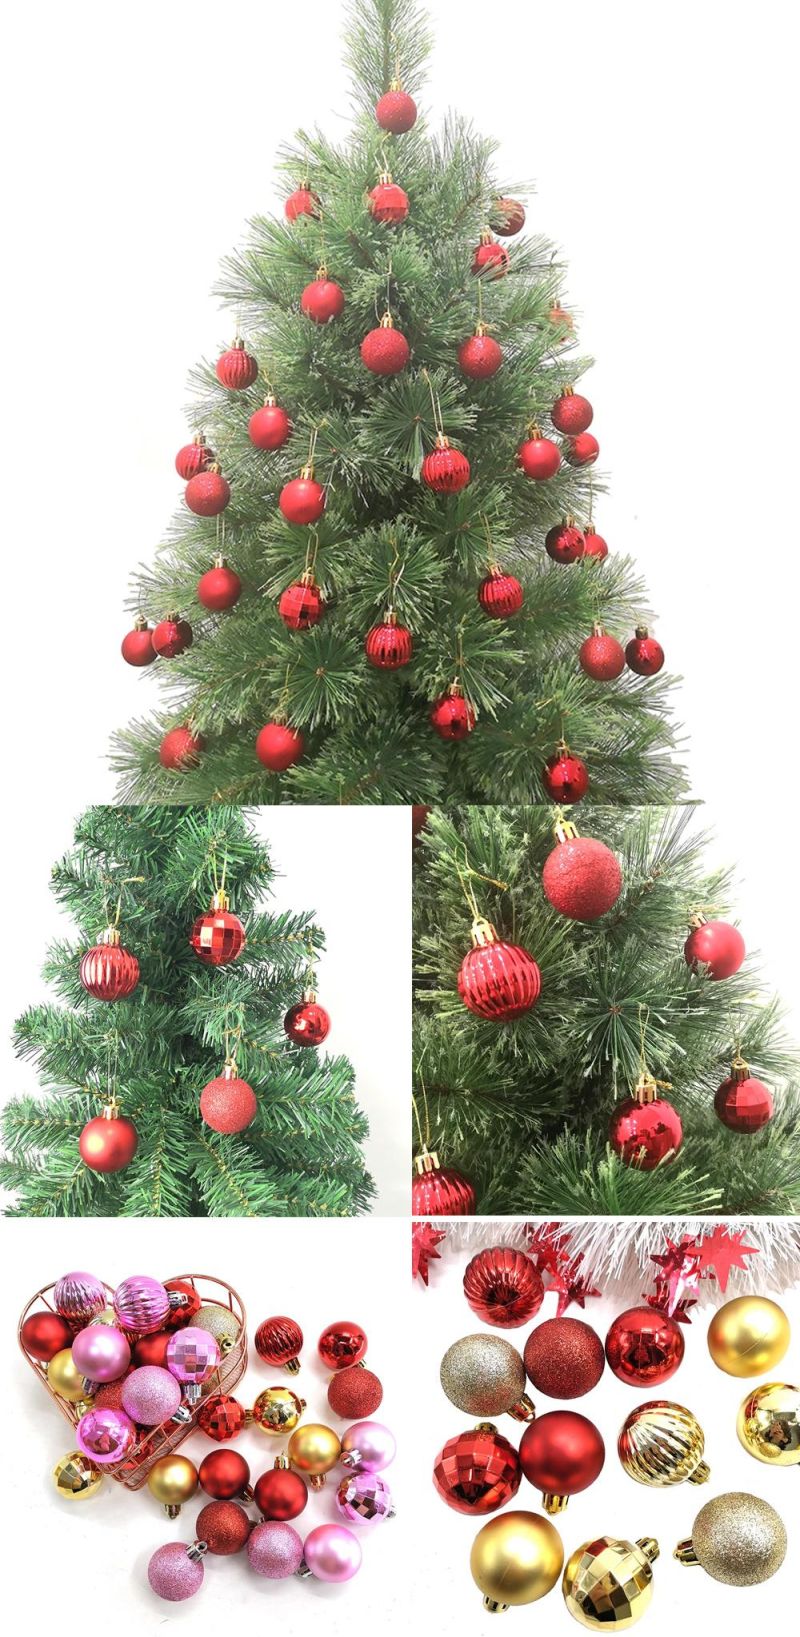 Wholesale Clear Plastic Christmas Ball